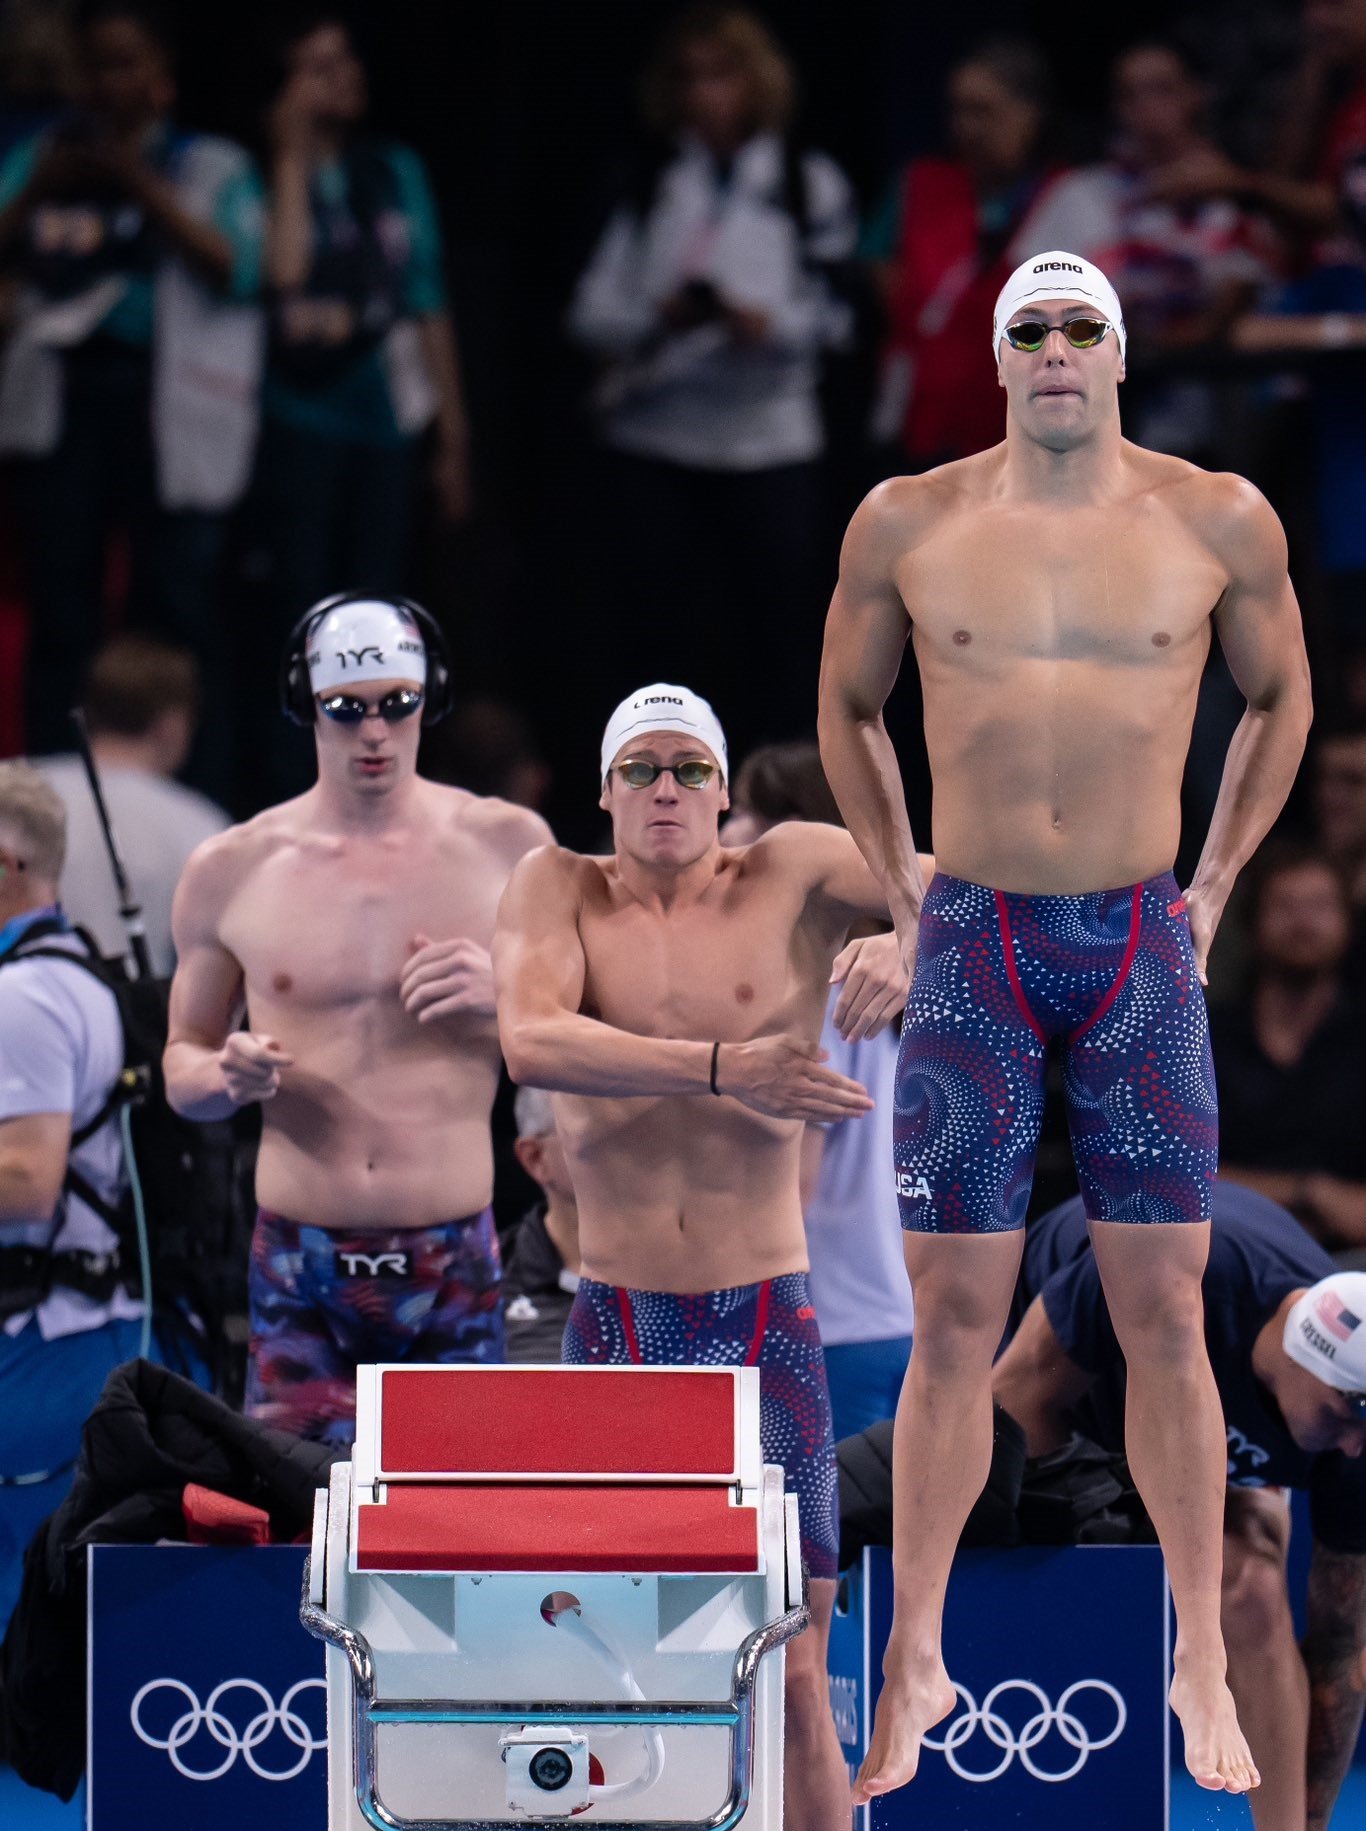 USA wins gold in men’s 4x100M freestyle relay final 3